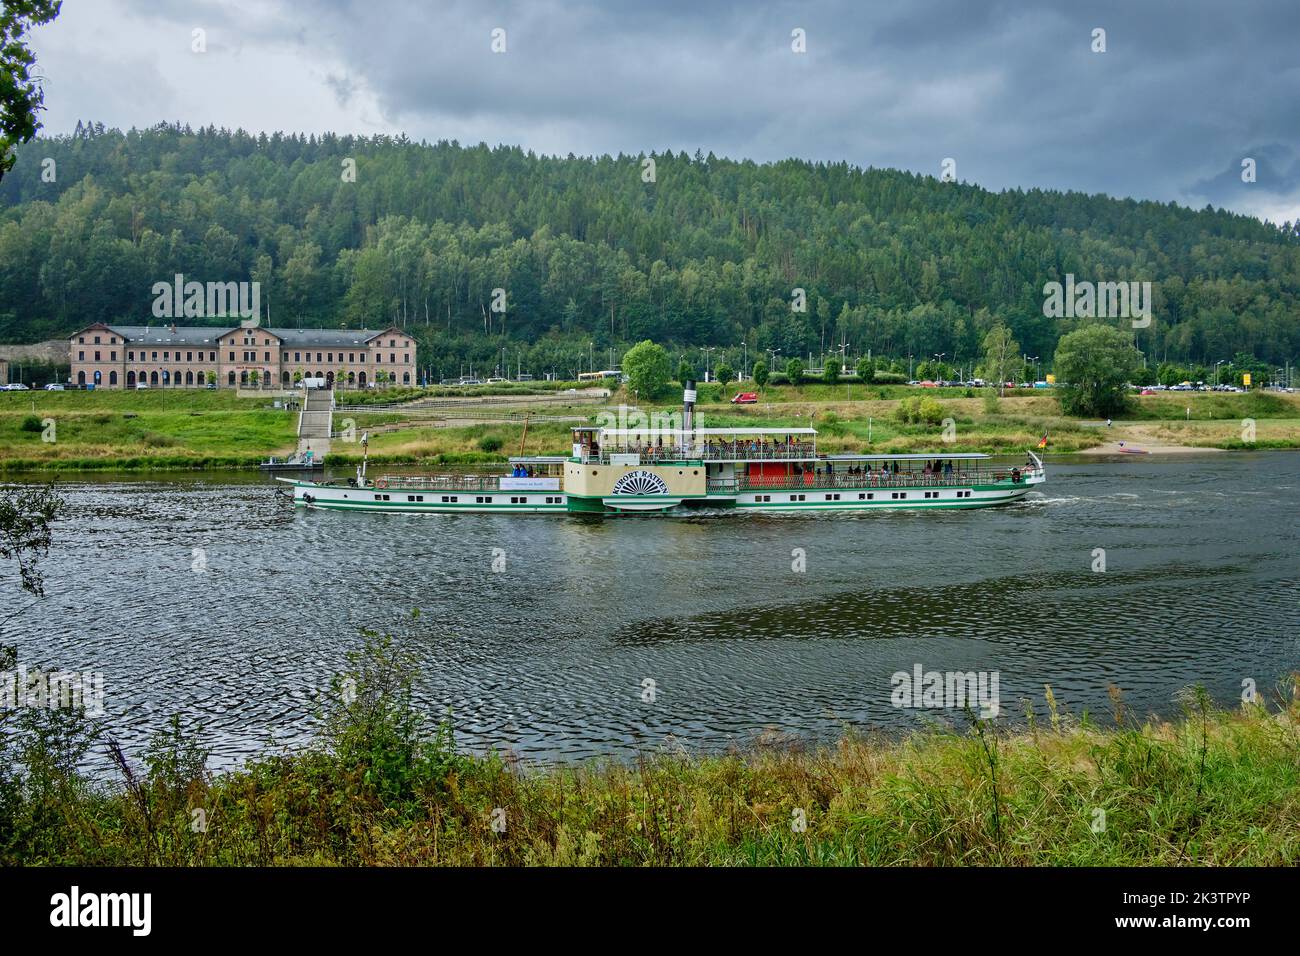 The steamer Kurort Rathen on the Elbe river in a thunderstorm atmosphere, at the height of Prossen, Bad Schandau, Saxon Switzerland, Saxony, Germany. Stock Photo